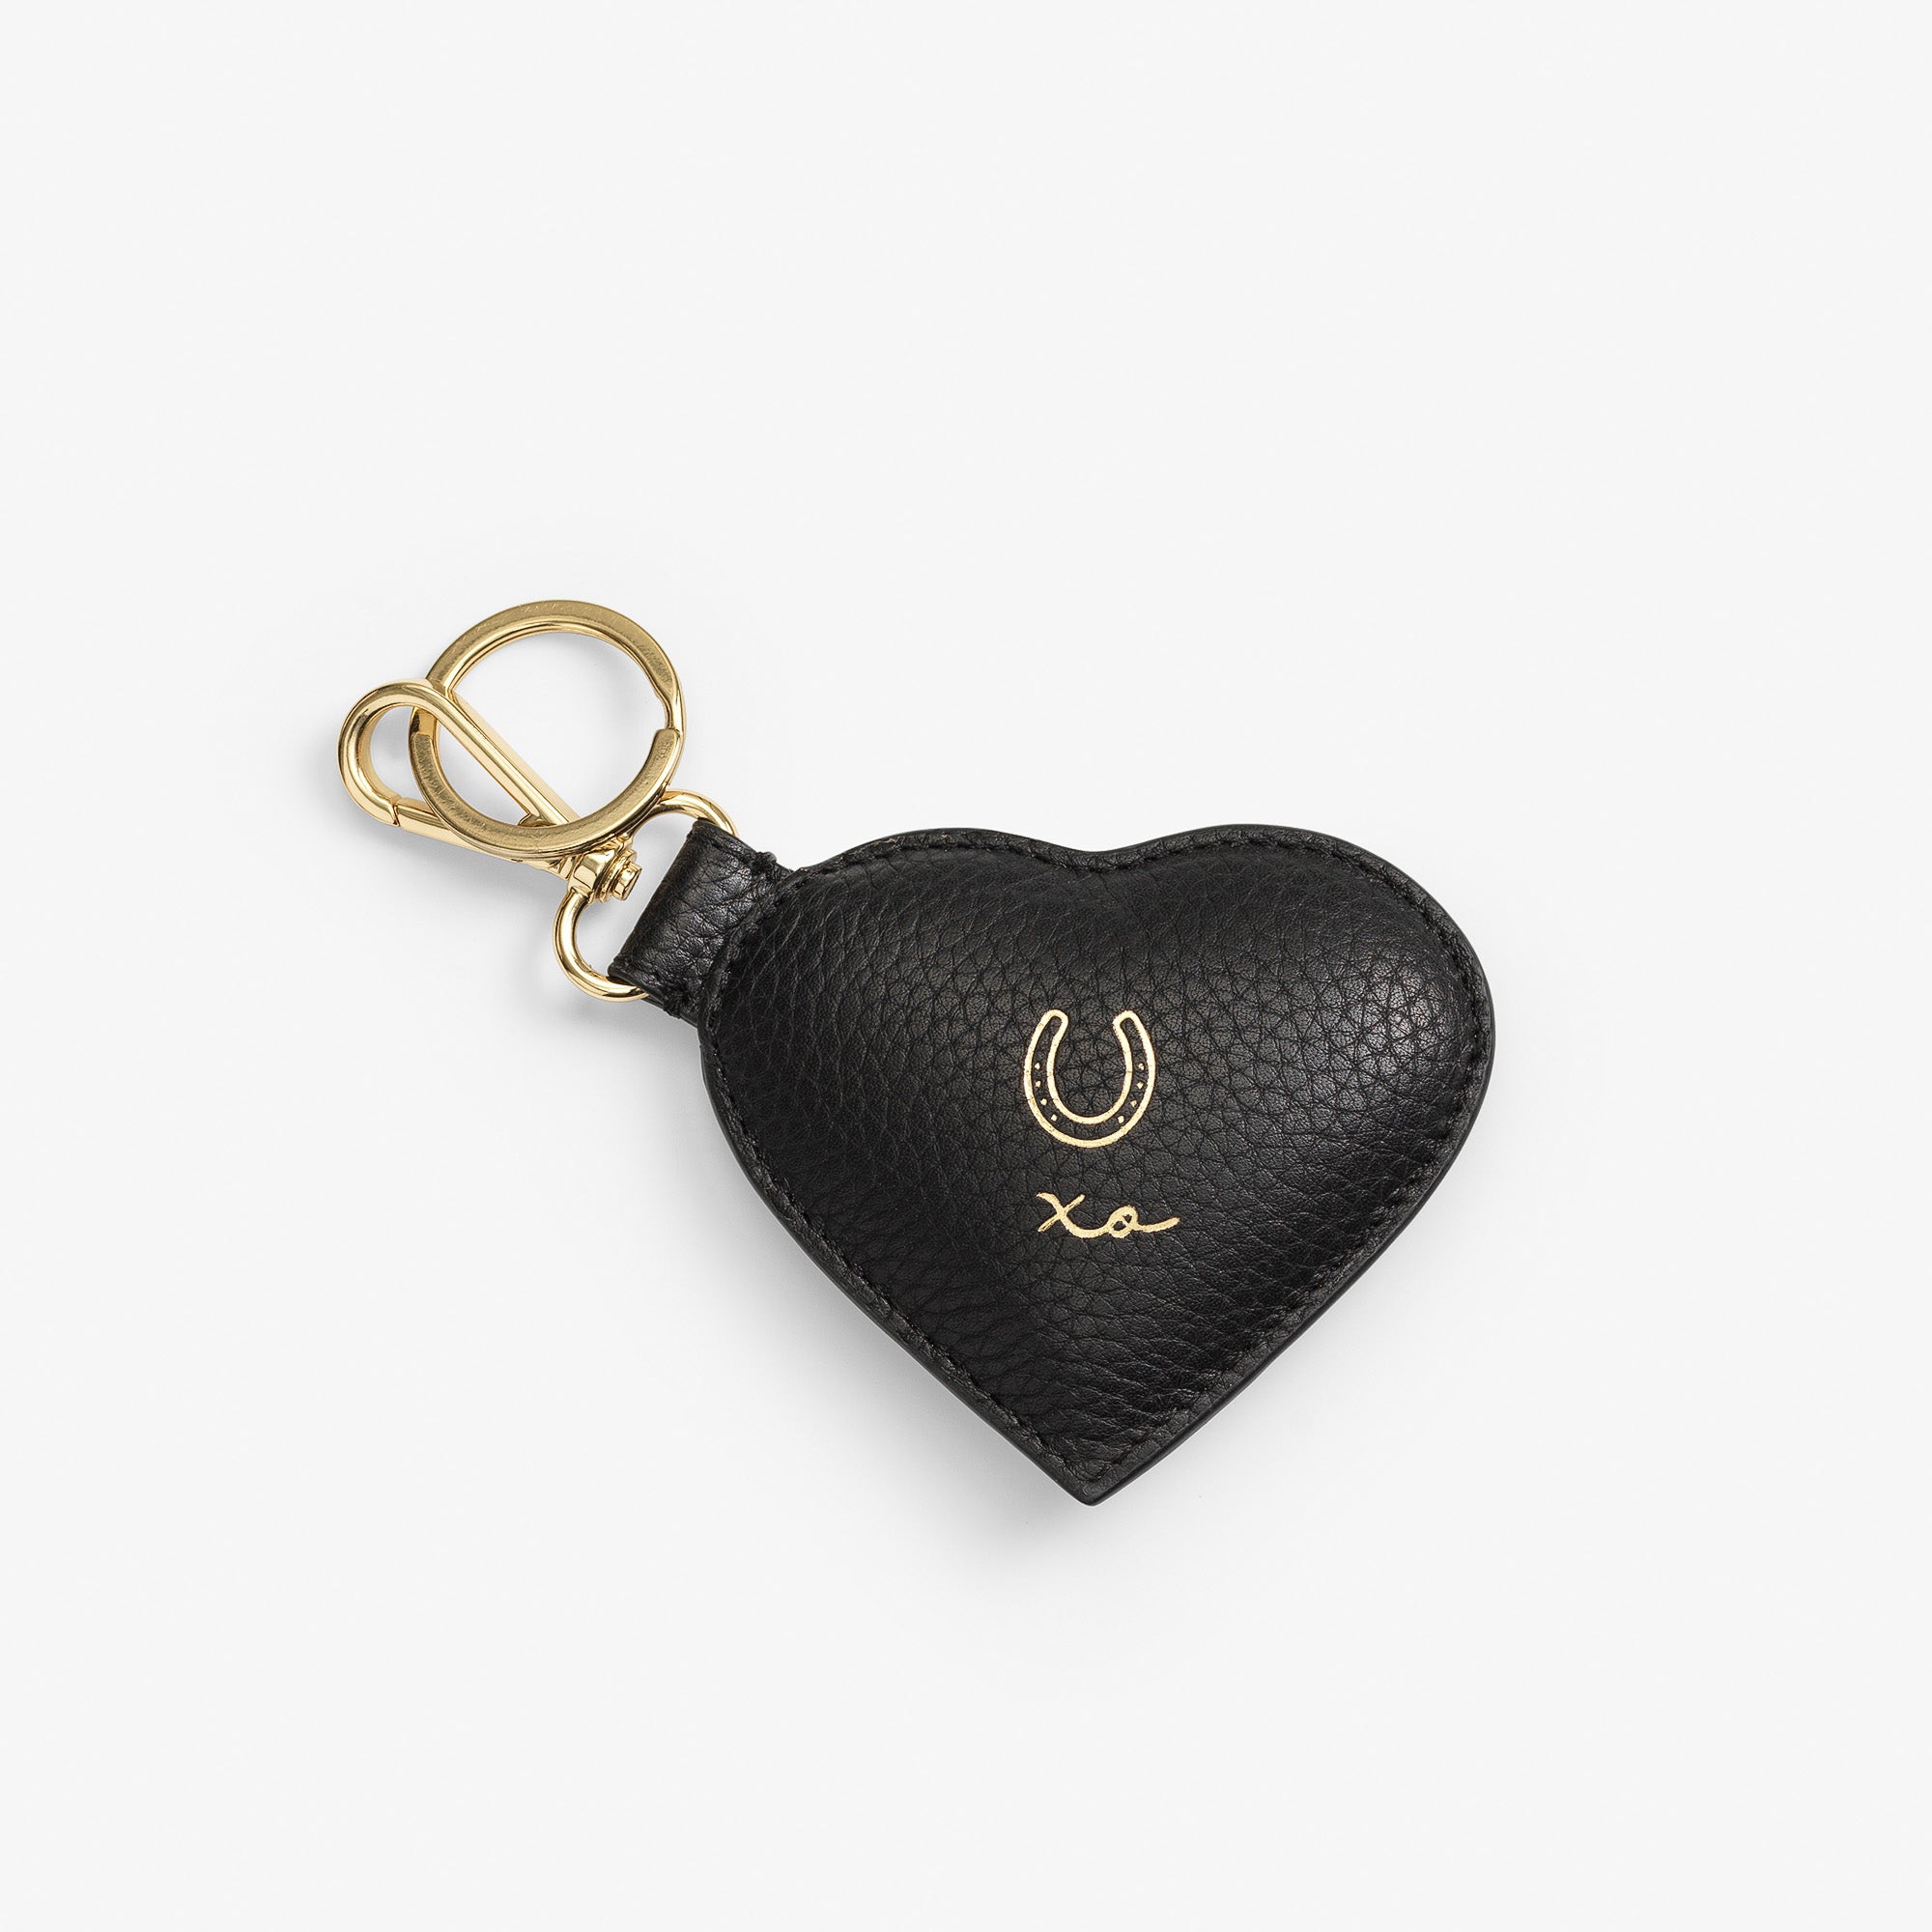 Love & Heart Leather Key Ring